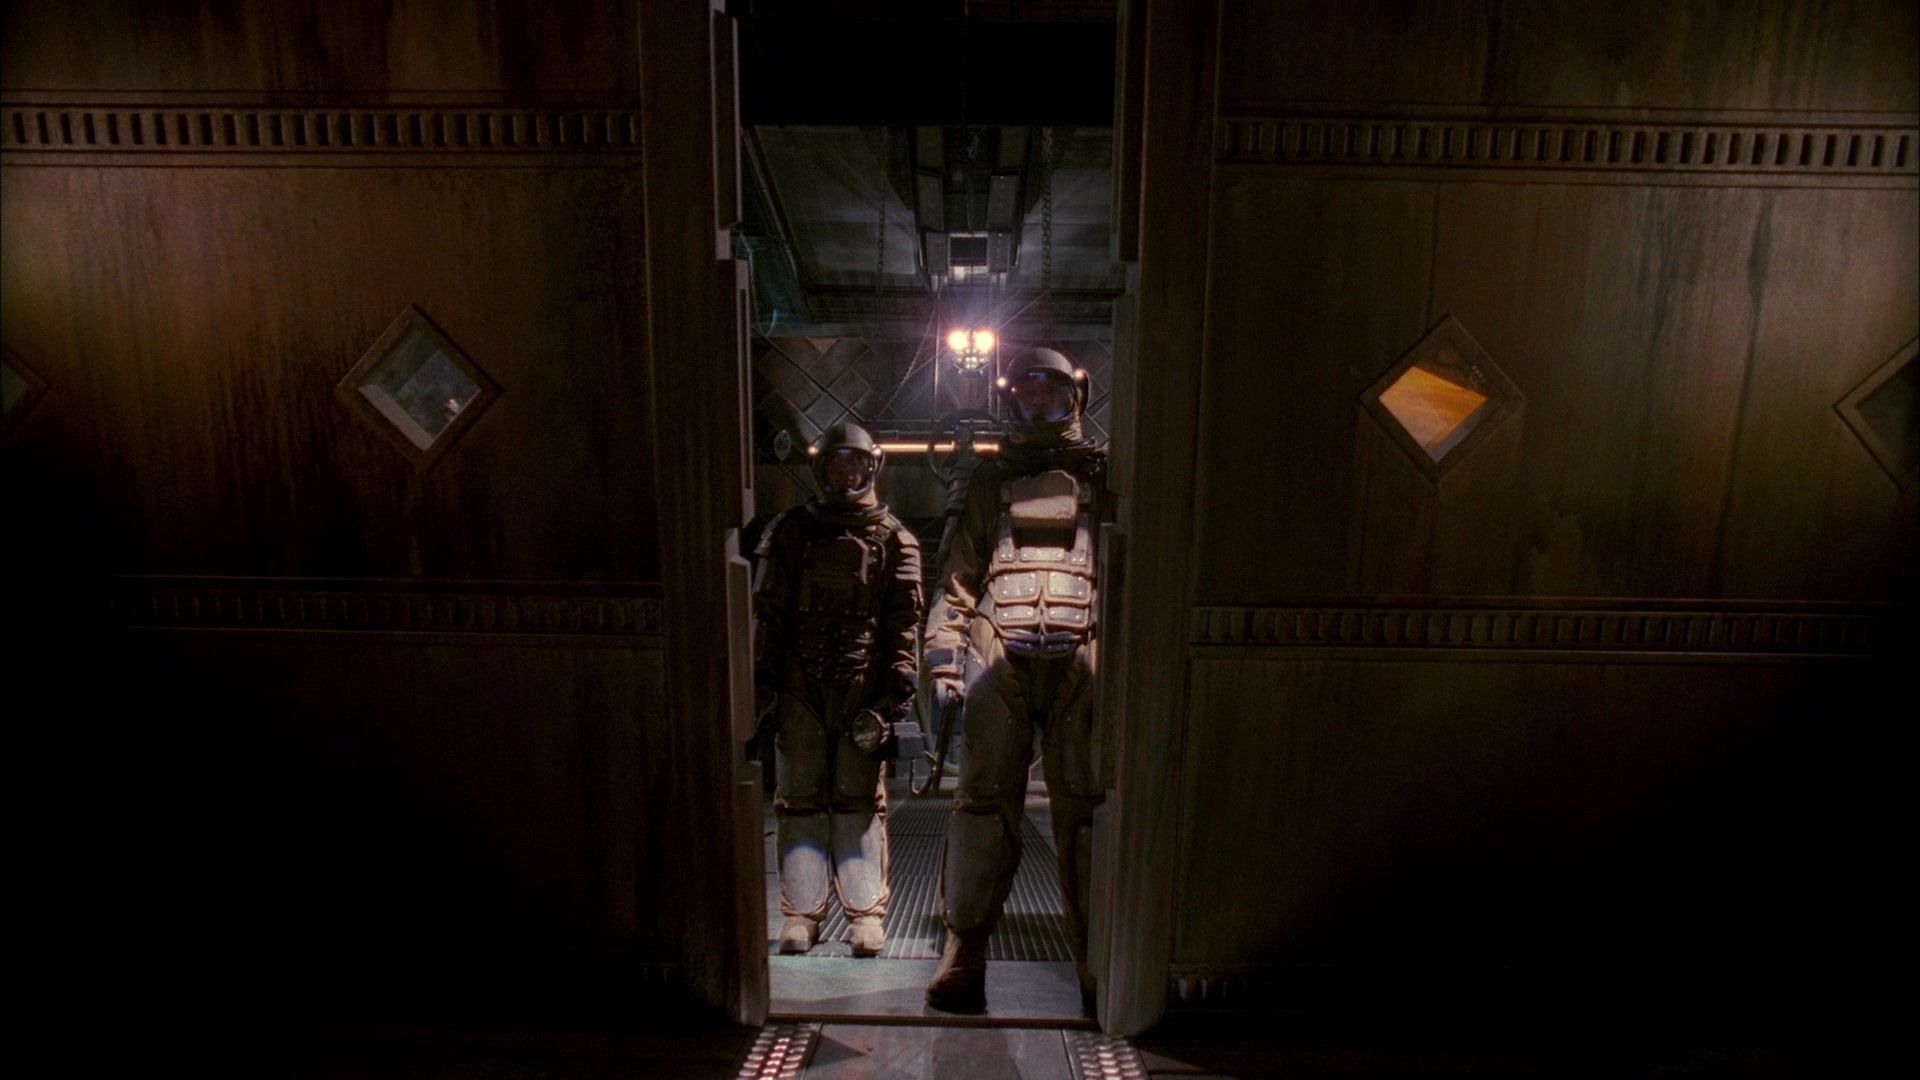 Mal Reynolds (Nathan Fillion) stands in a space suit as the bulkhead doors open.